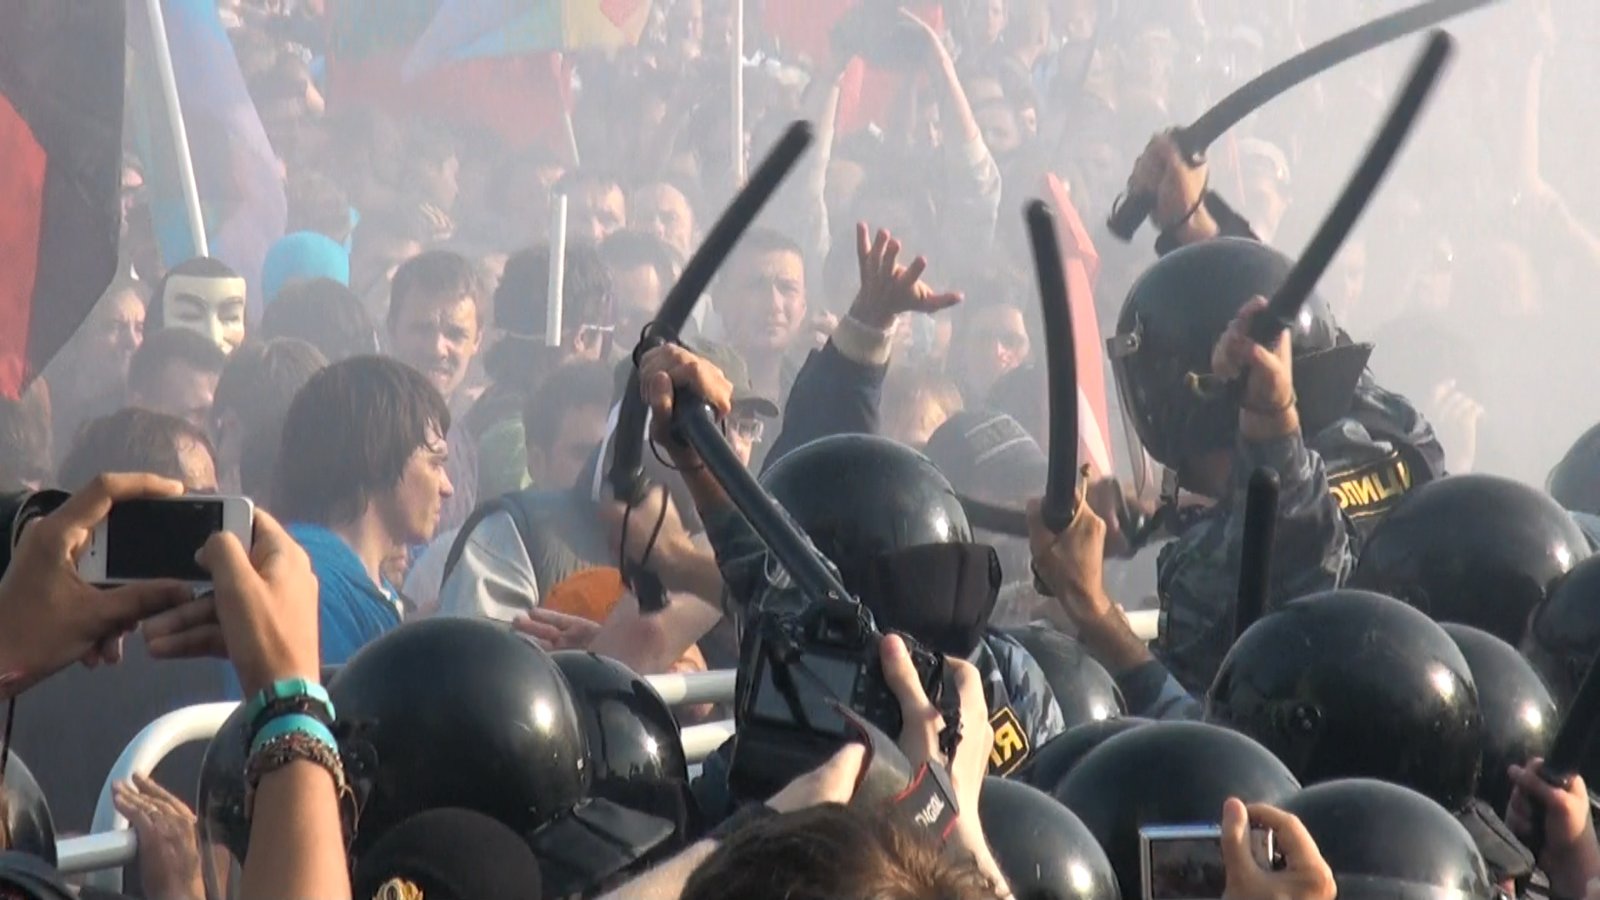 Details about Bolotnaya IV. Clashes and violence